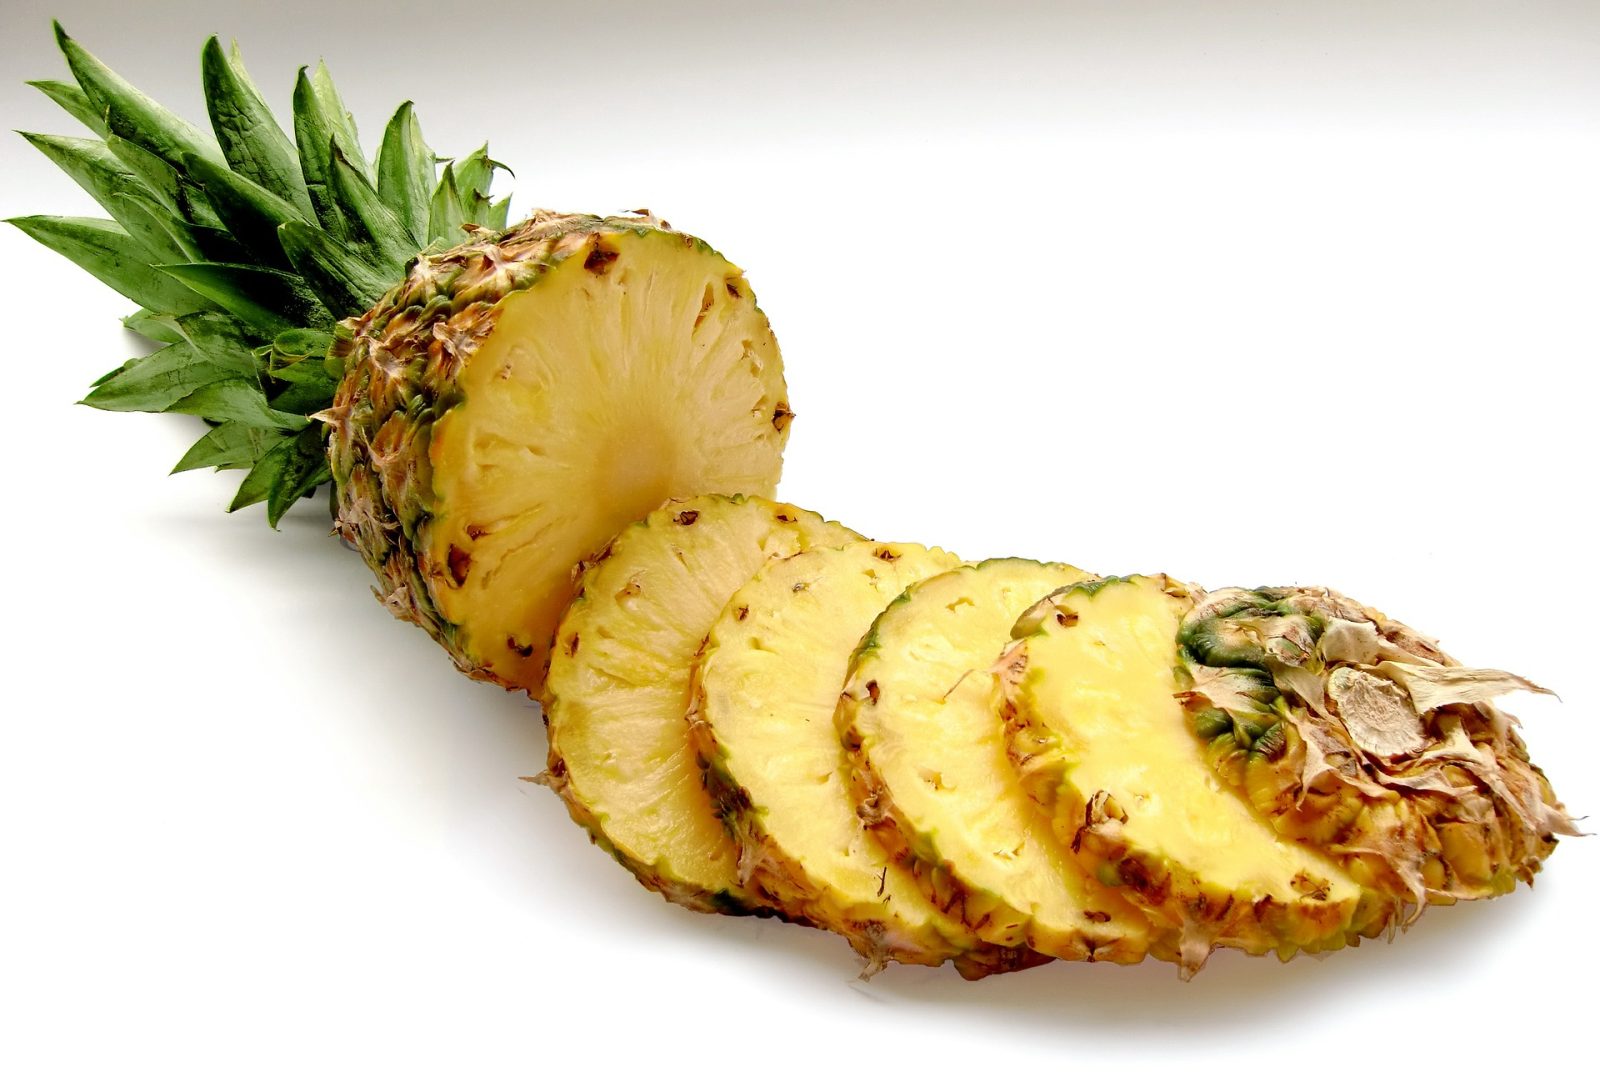 pineapple cut up into round slices